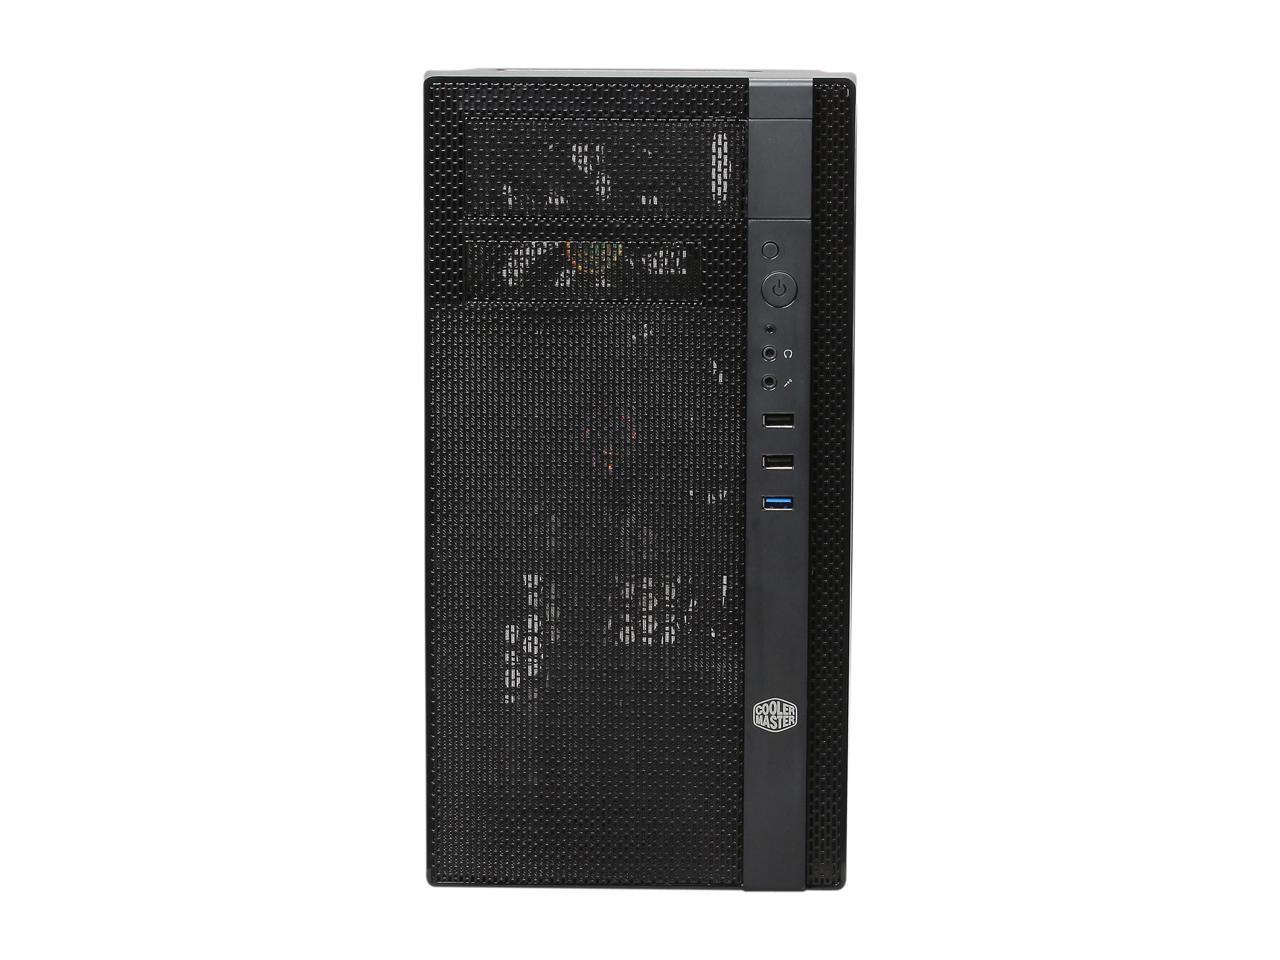 cooler-master-n200-micro-atx-mini-tower-with-front-mesh-ventilation